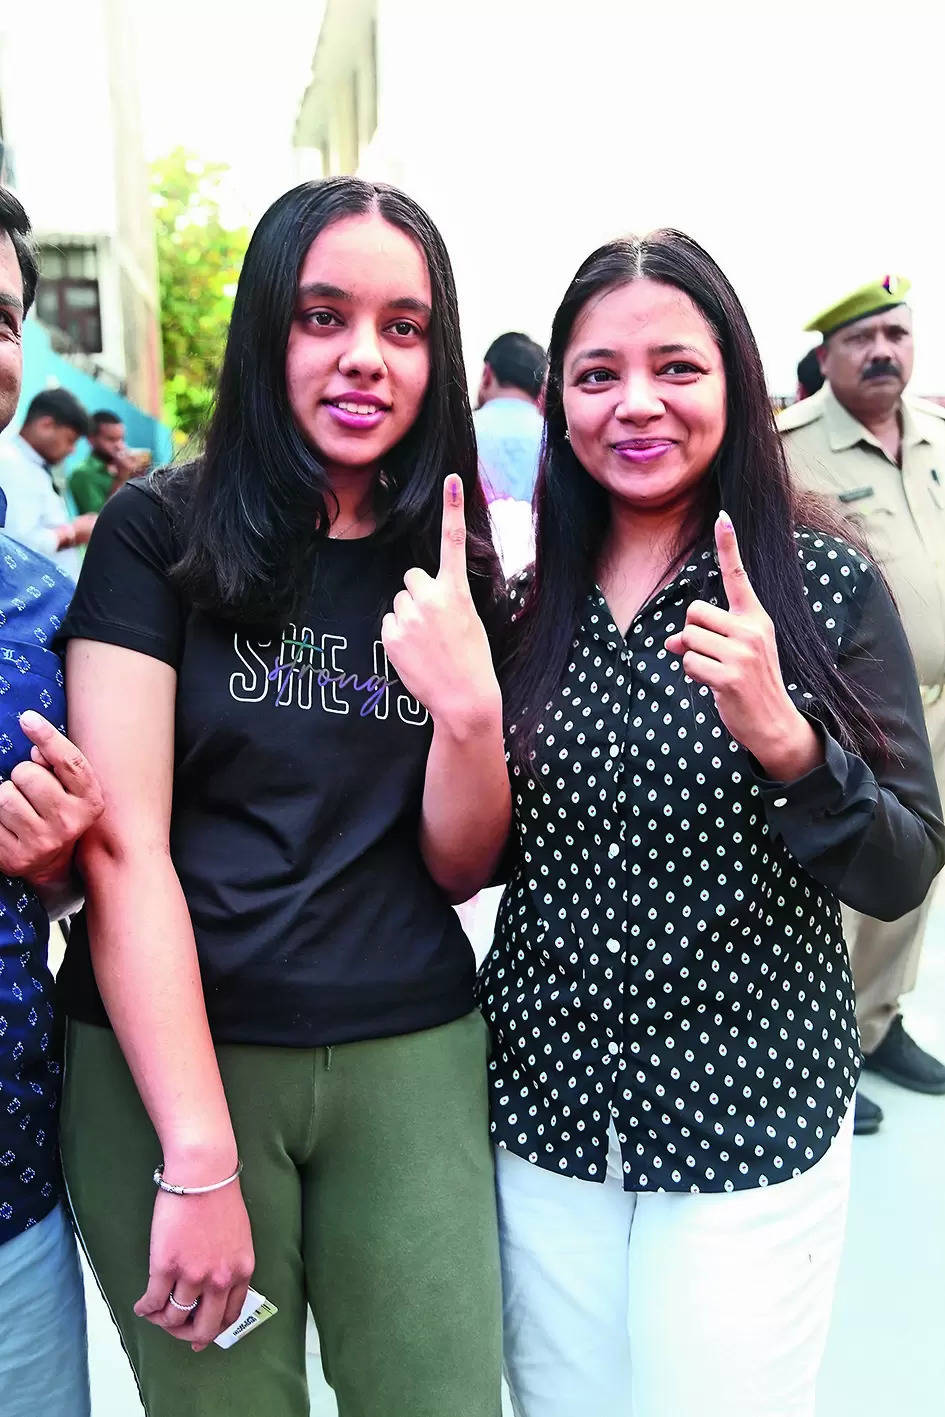 First-time voters: Some come after manifesto ‘research’, some for selfie